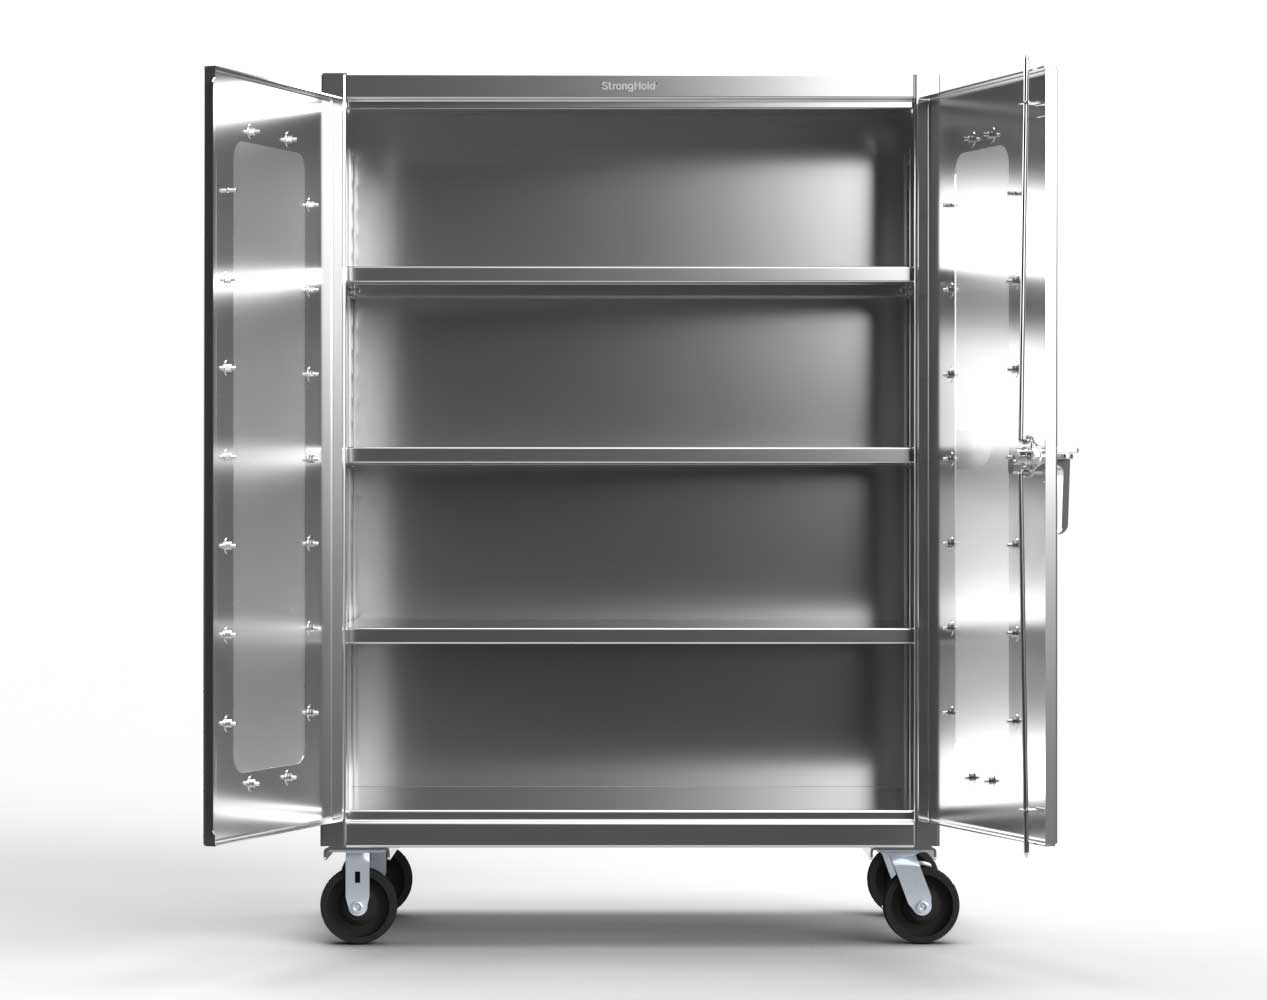 Extreme Duty 12 GA Stainless Steel Mobile Medical Cabinet with Cylinder Lock, 4 Shelves - 60 In. W x 30 In. D x 80 In. H